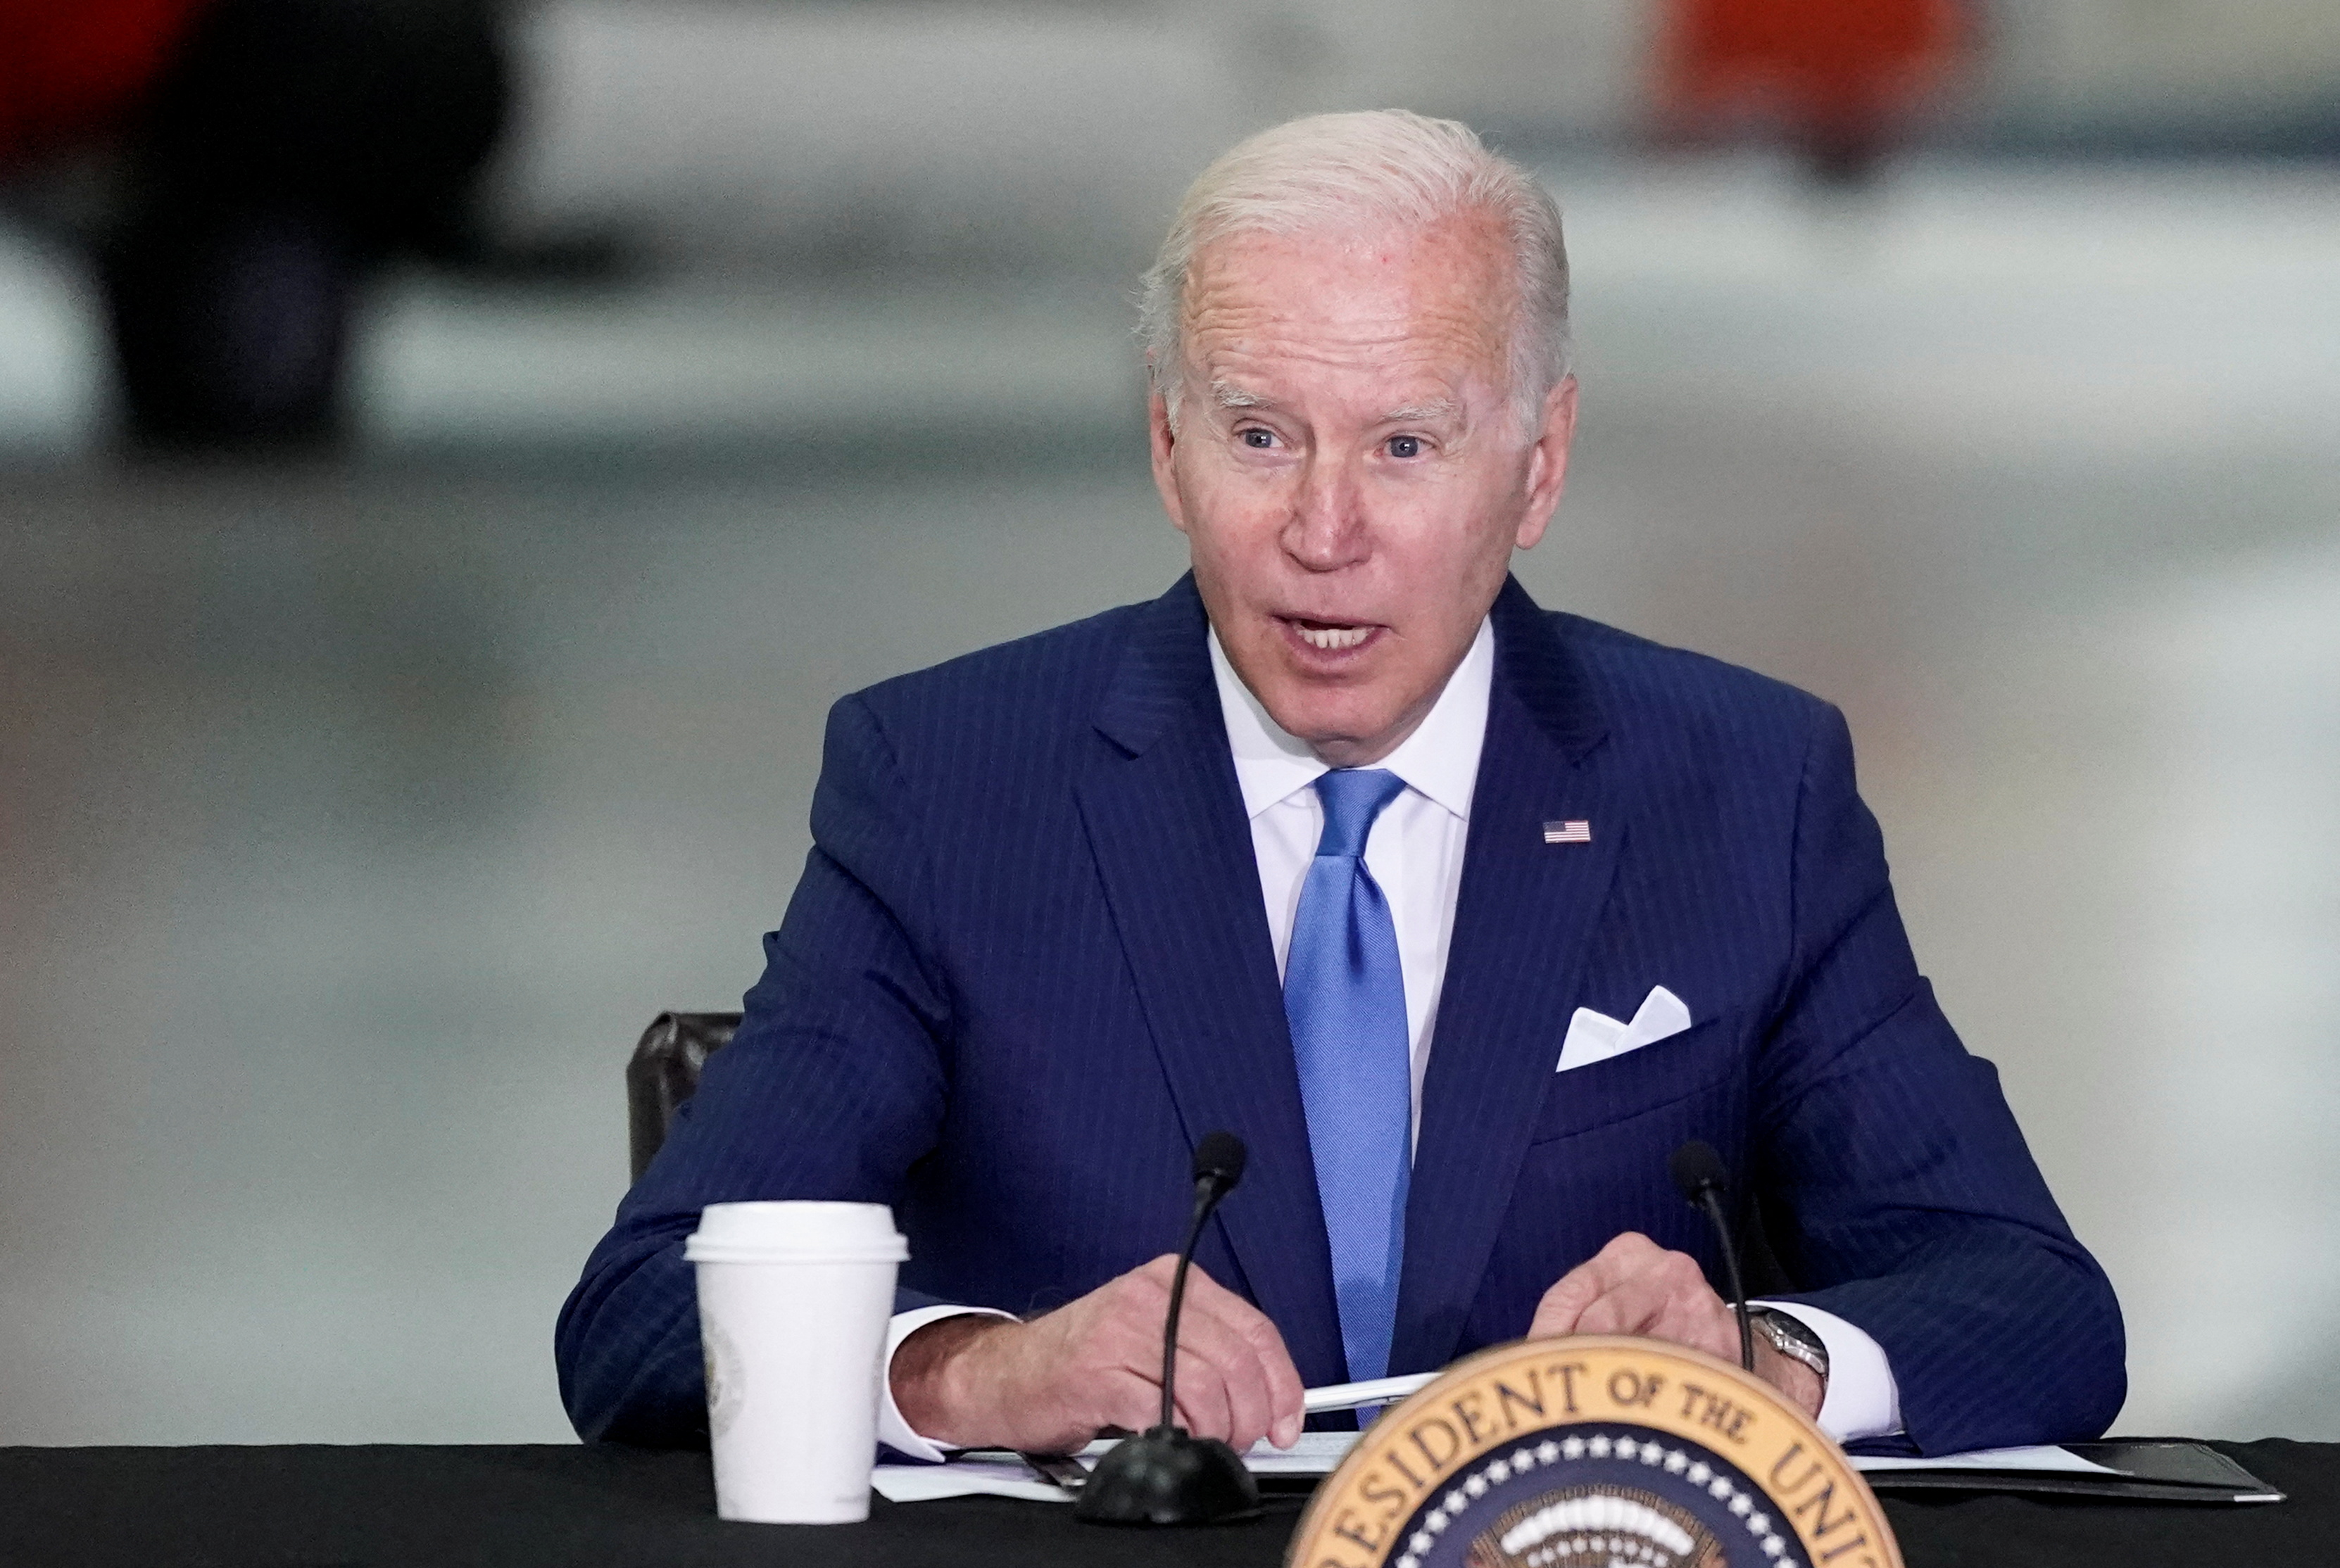 U.S. President Biden joins a briefing on efforts to prepare and respond to future hurricanes